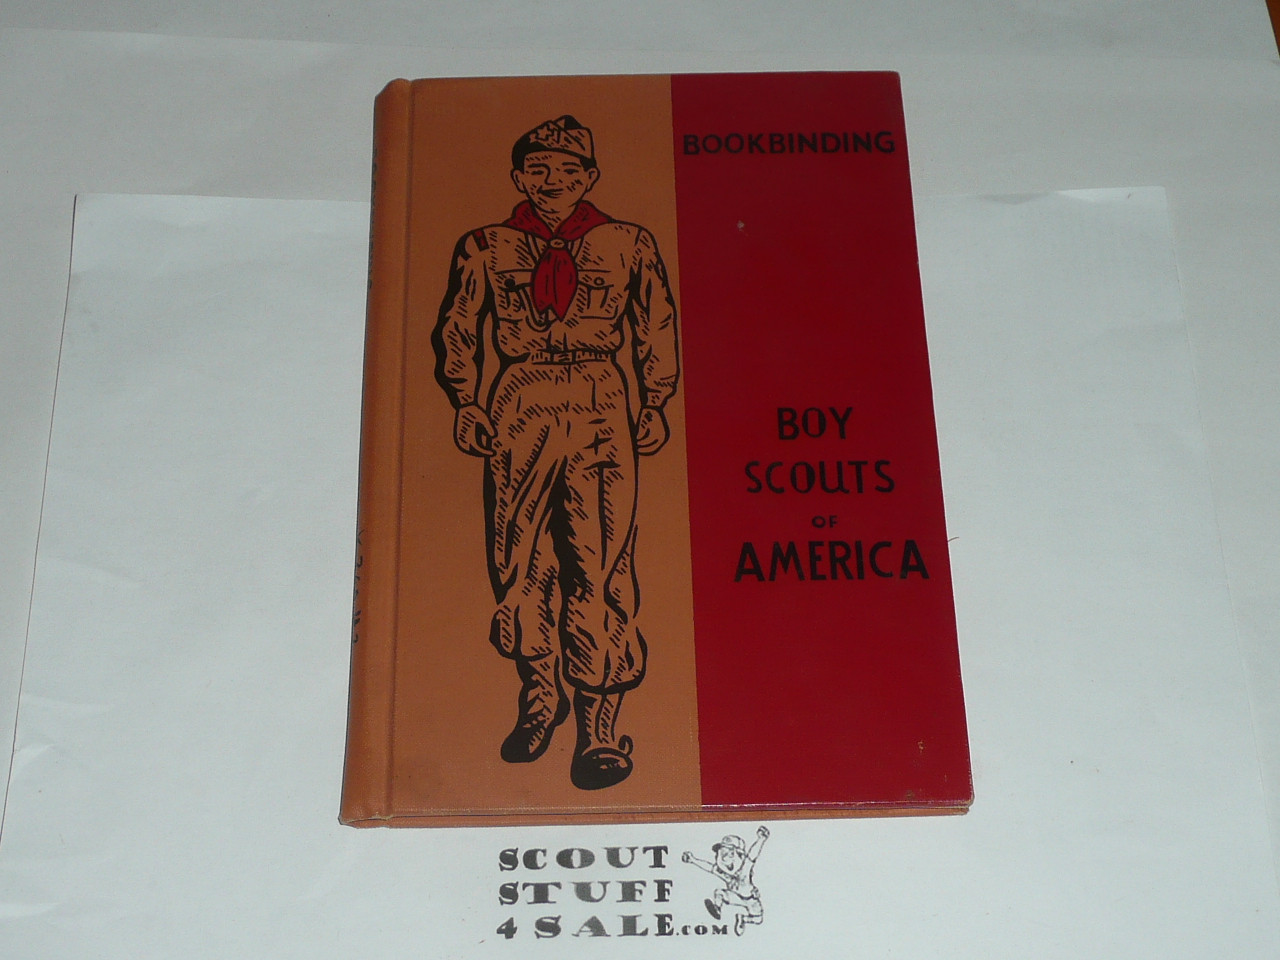 Bookbinding Library Bound Merit Badge Pamphlet, Type 6, Picture Top Red Bottom Cover, 5-57 Printing